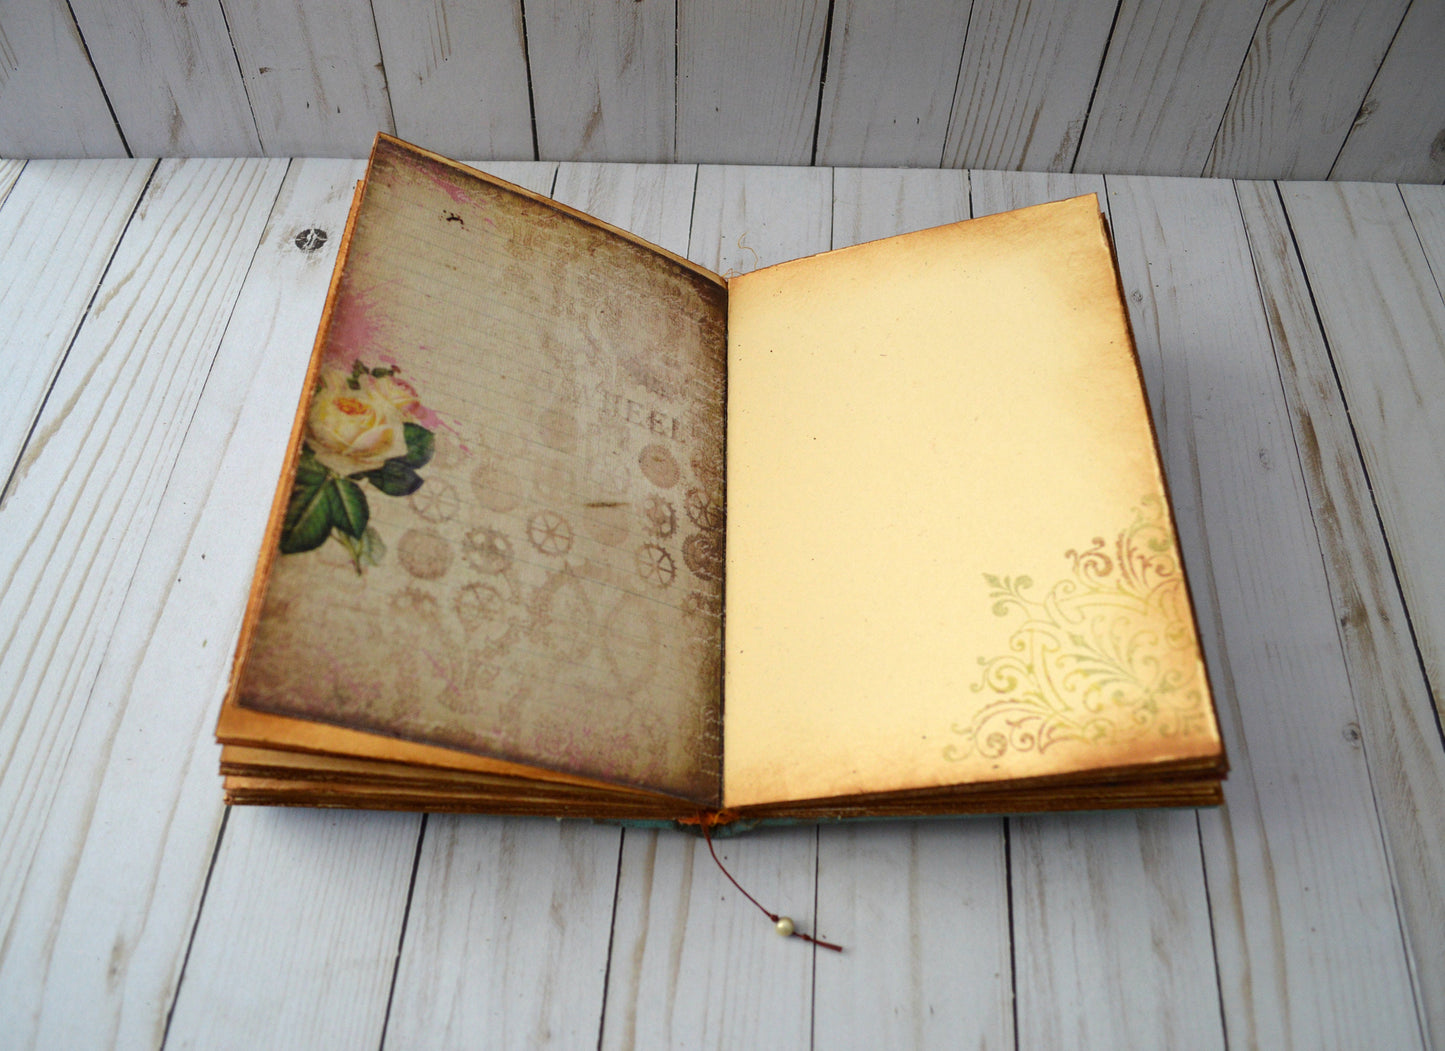 Wedding Journal Diary in Vintage style, Happily Ever After Wedding Guest Book, Scrapbook Album Memoir, Creative Photo Book, Gift for her